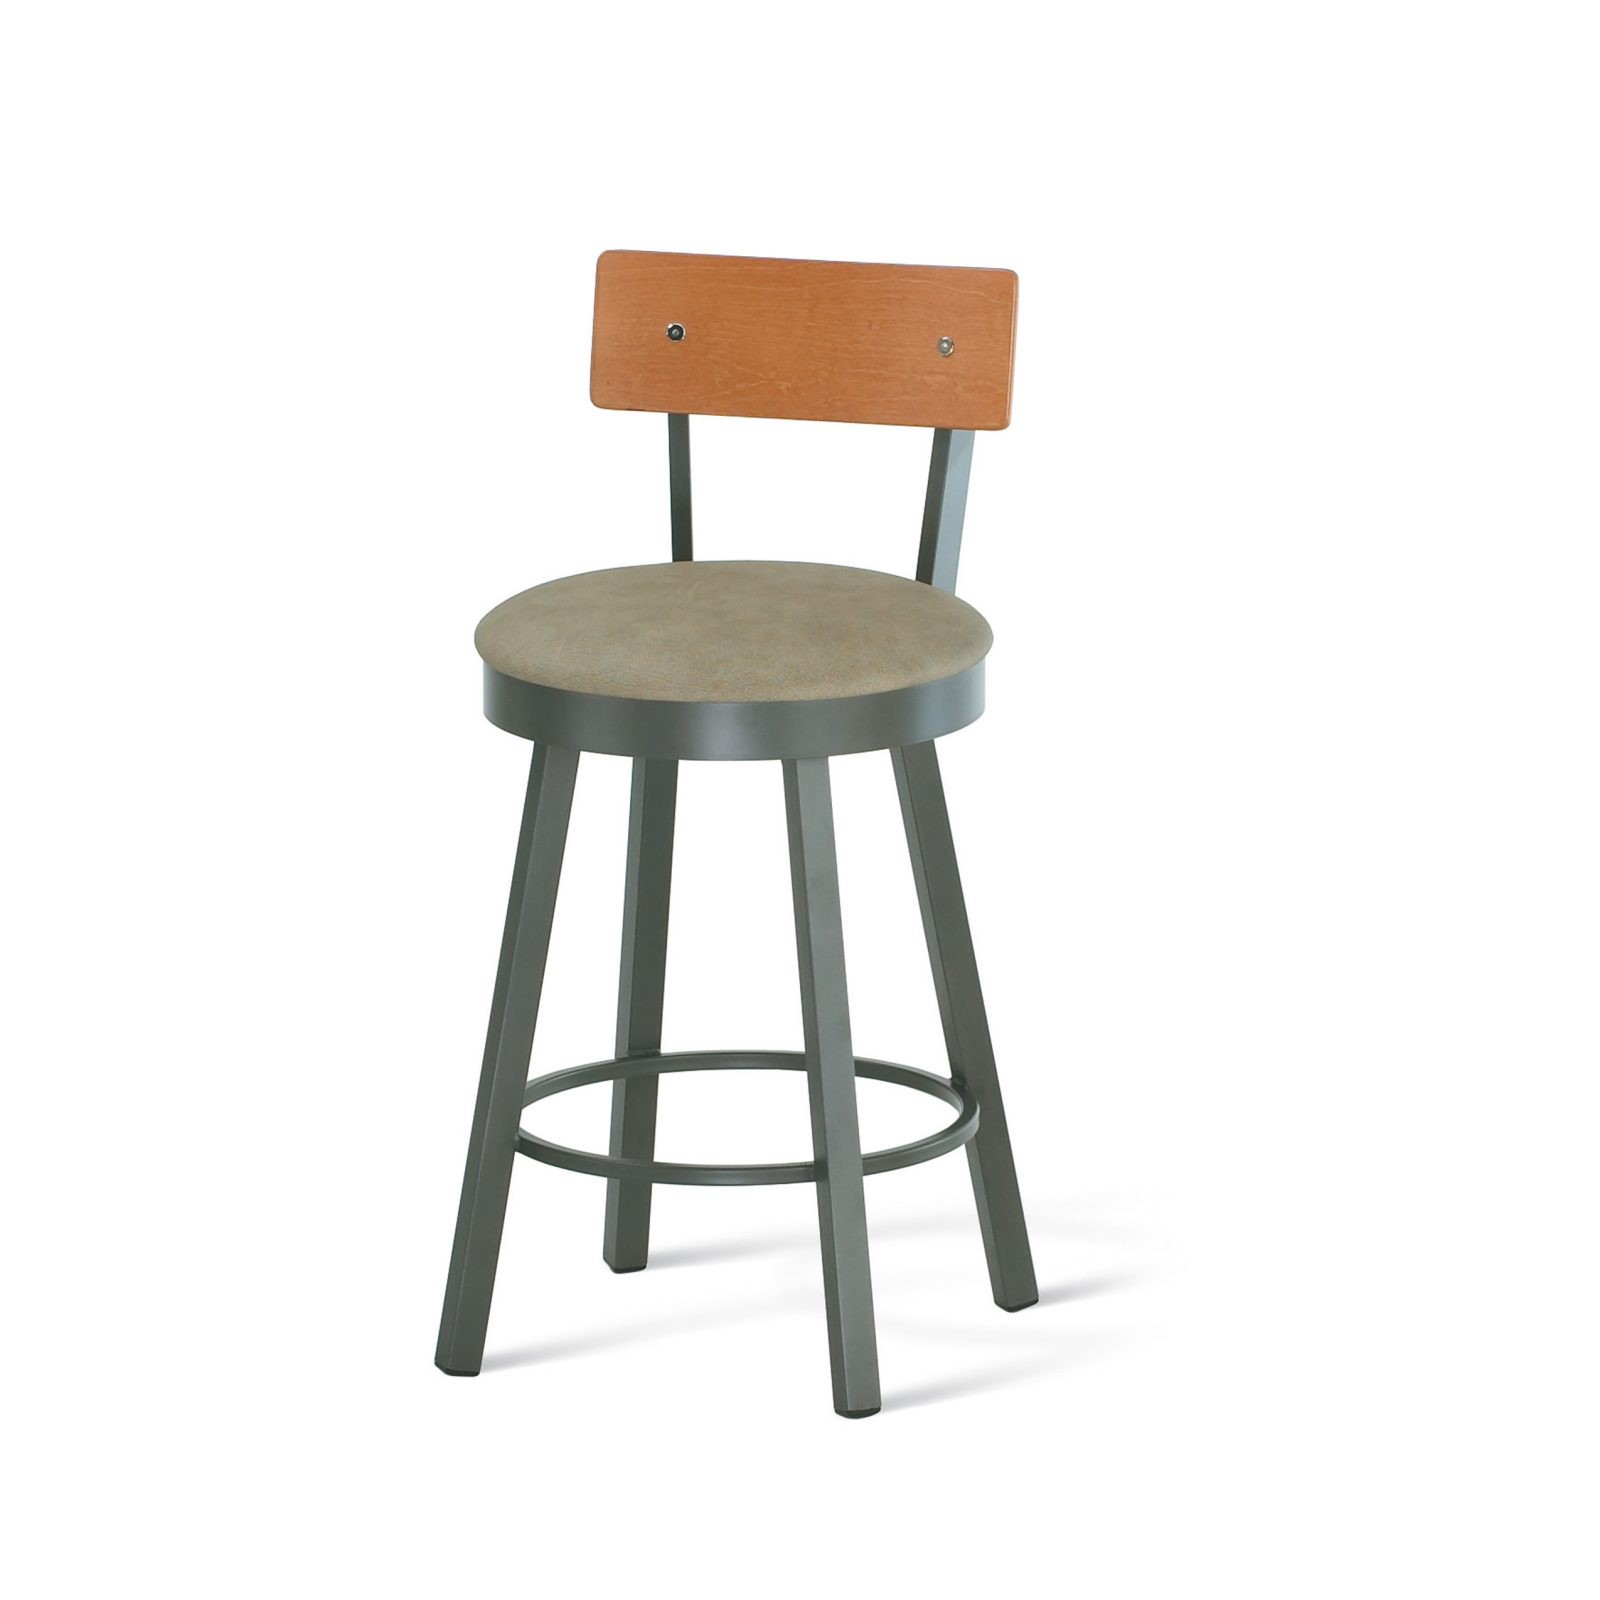 Metal Finish: 57 Metallo • Seat Covering: Discontinued • Wood Back: 83 Tabacco (discontinued)